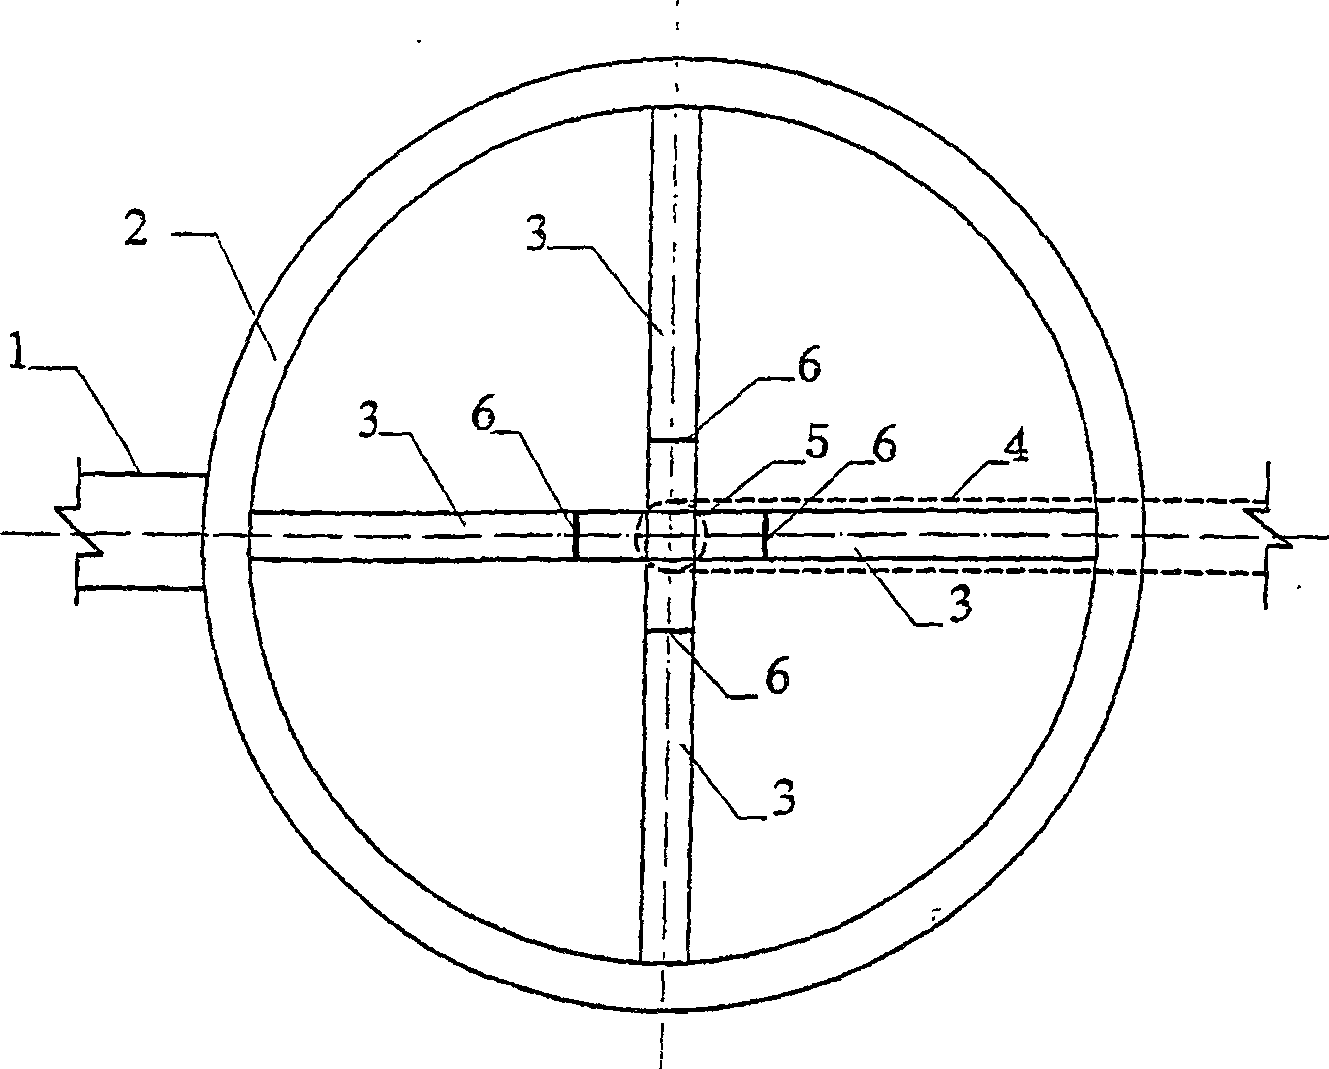 Periphery water-inlet continuous water-outlet radial settling tank